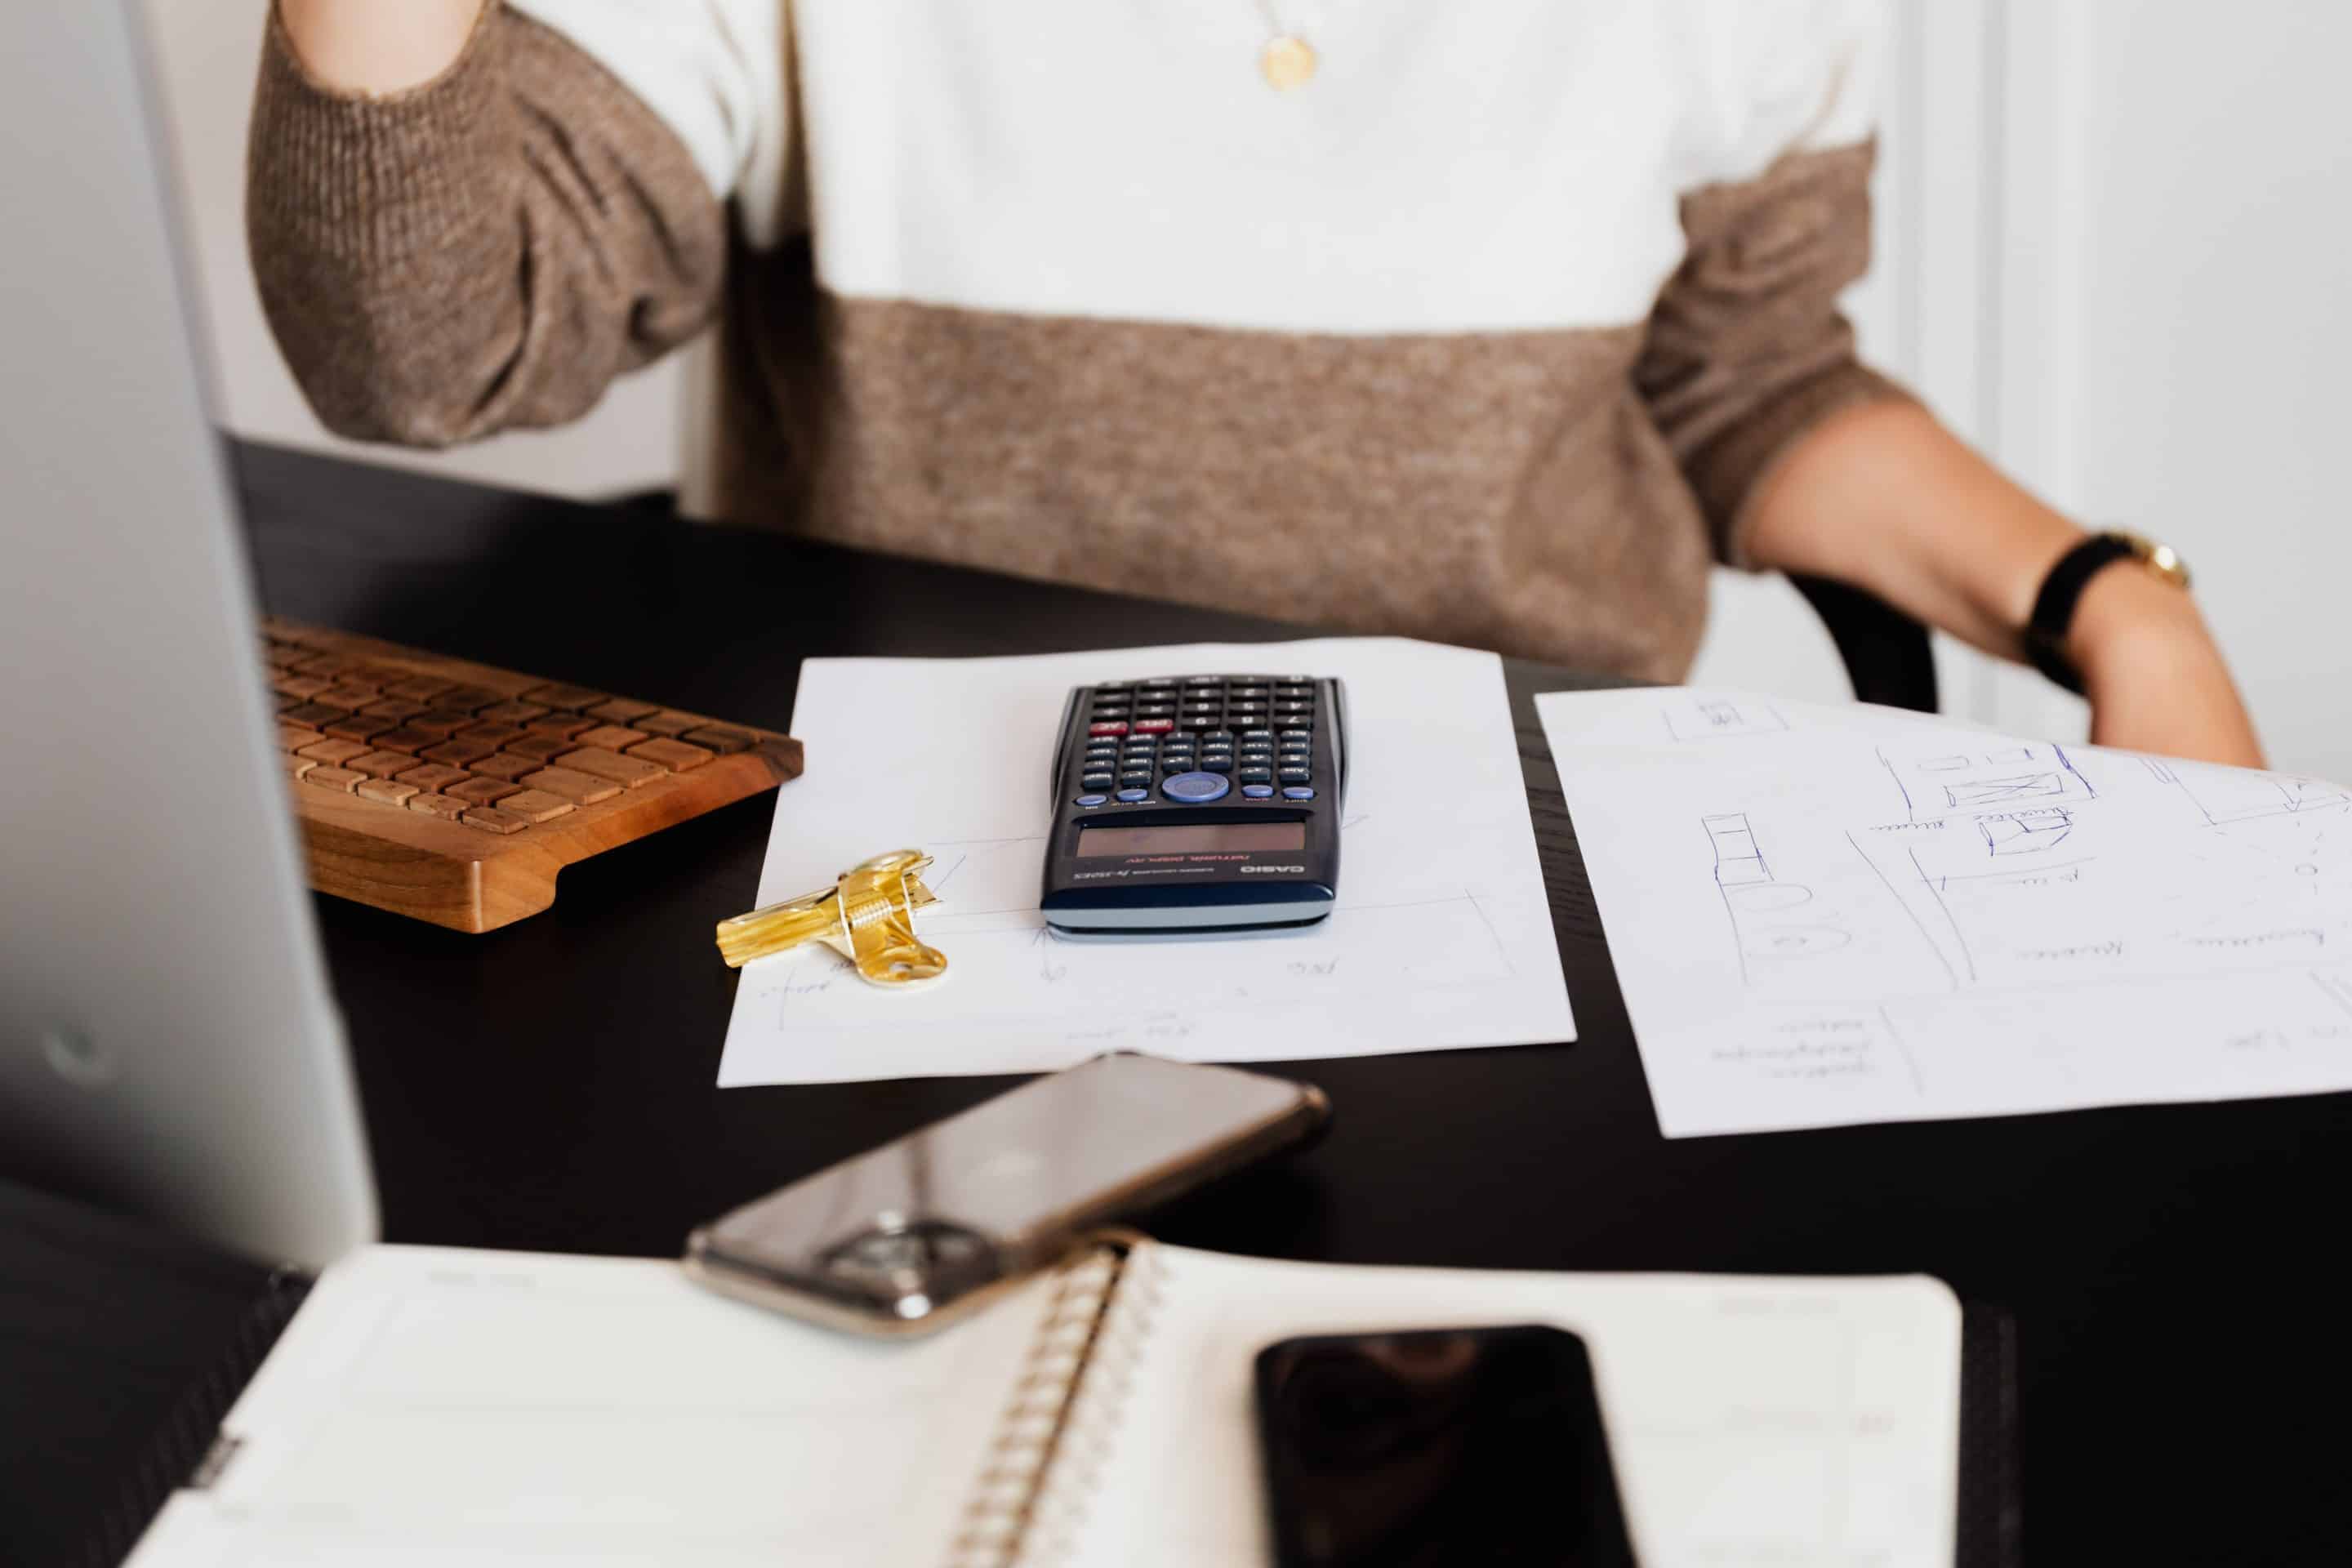 Woman sitting at a table with a calculator and notebook